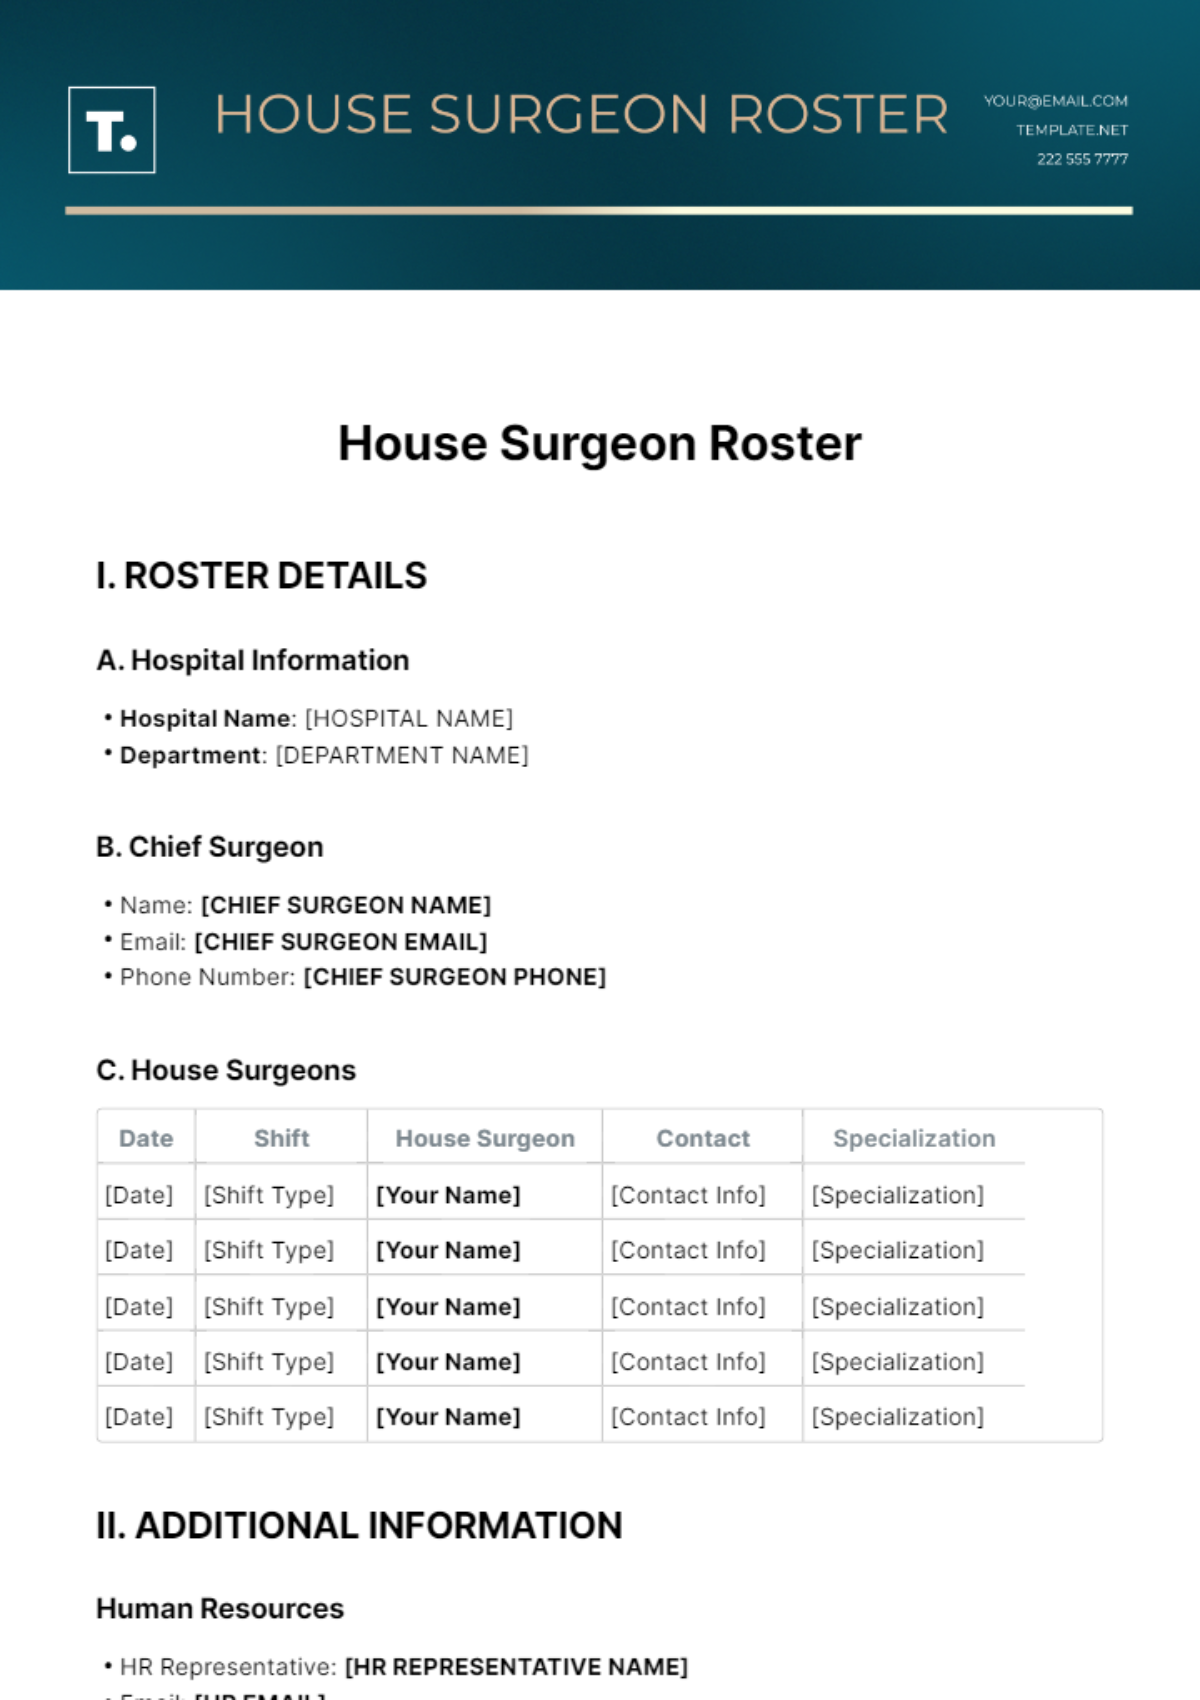 House Surgeon Roster Template